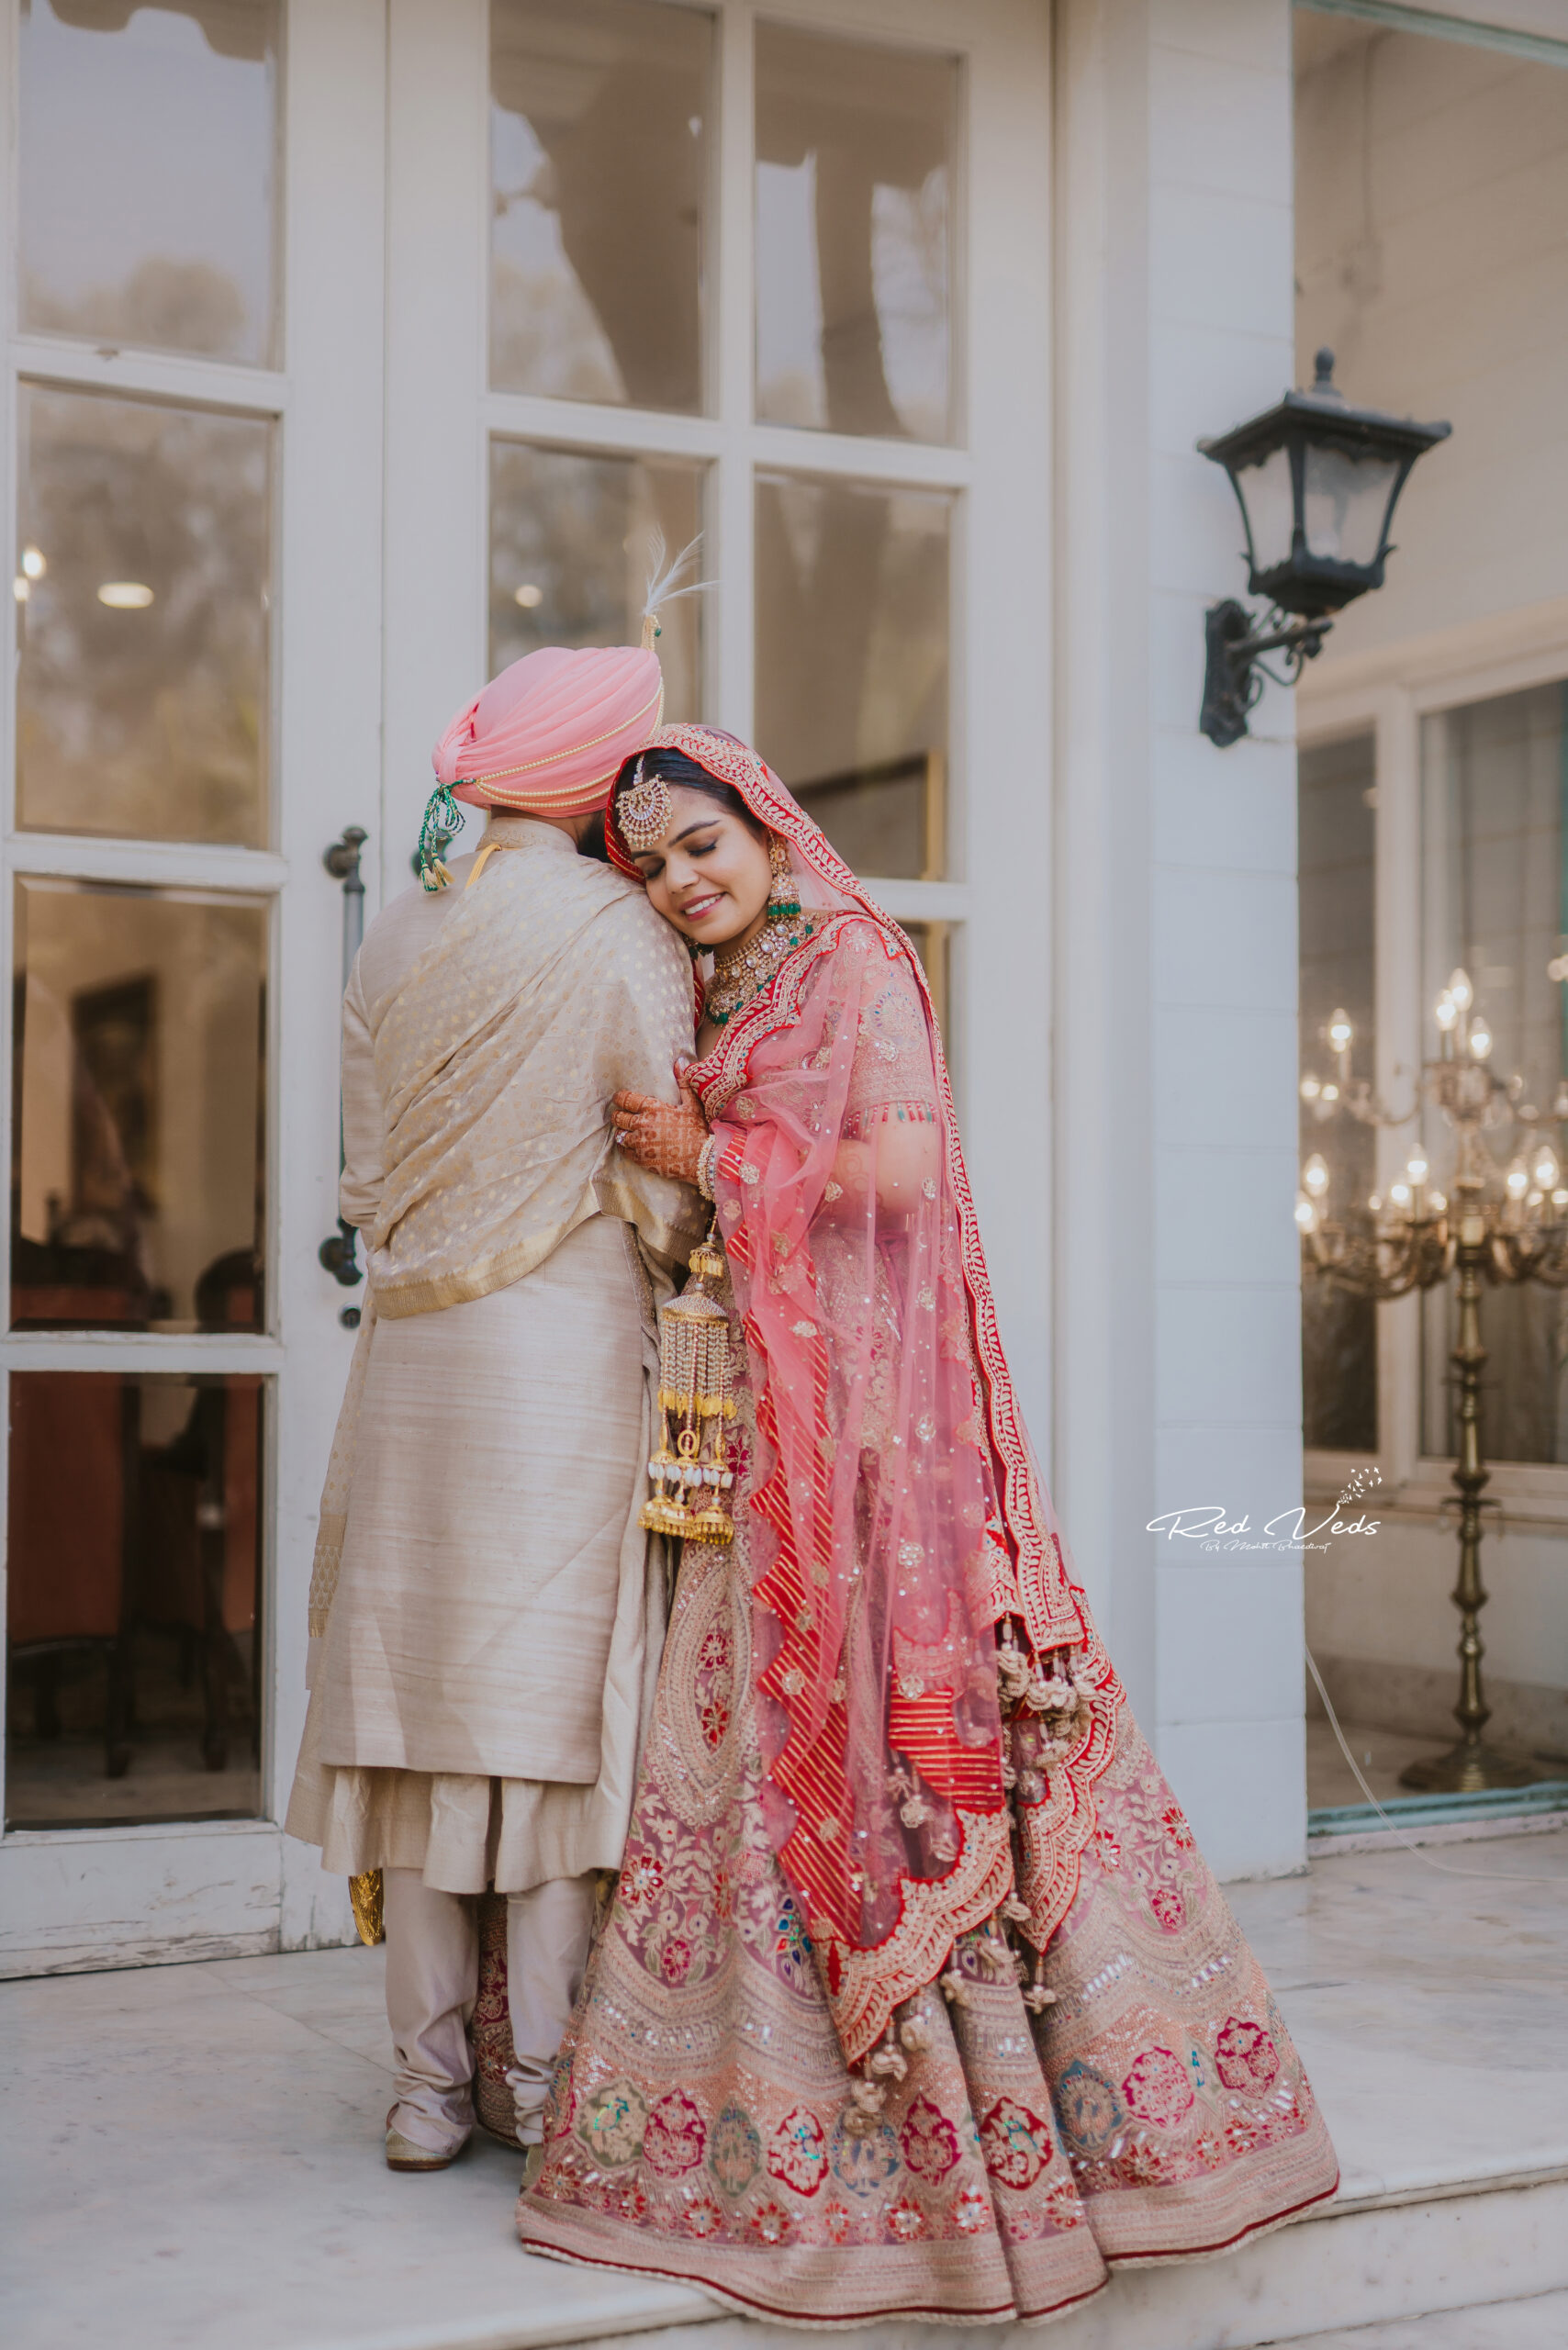 Young Indian Wedding Couple Posing Photographs Stock Photo 1515432737 |  Shutterstock